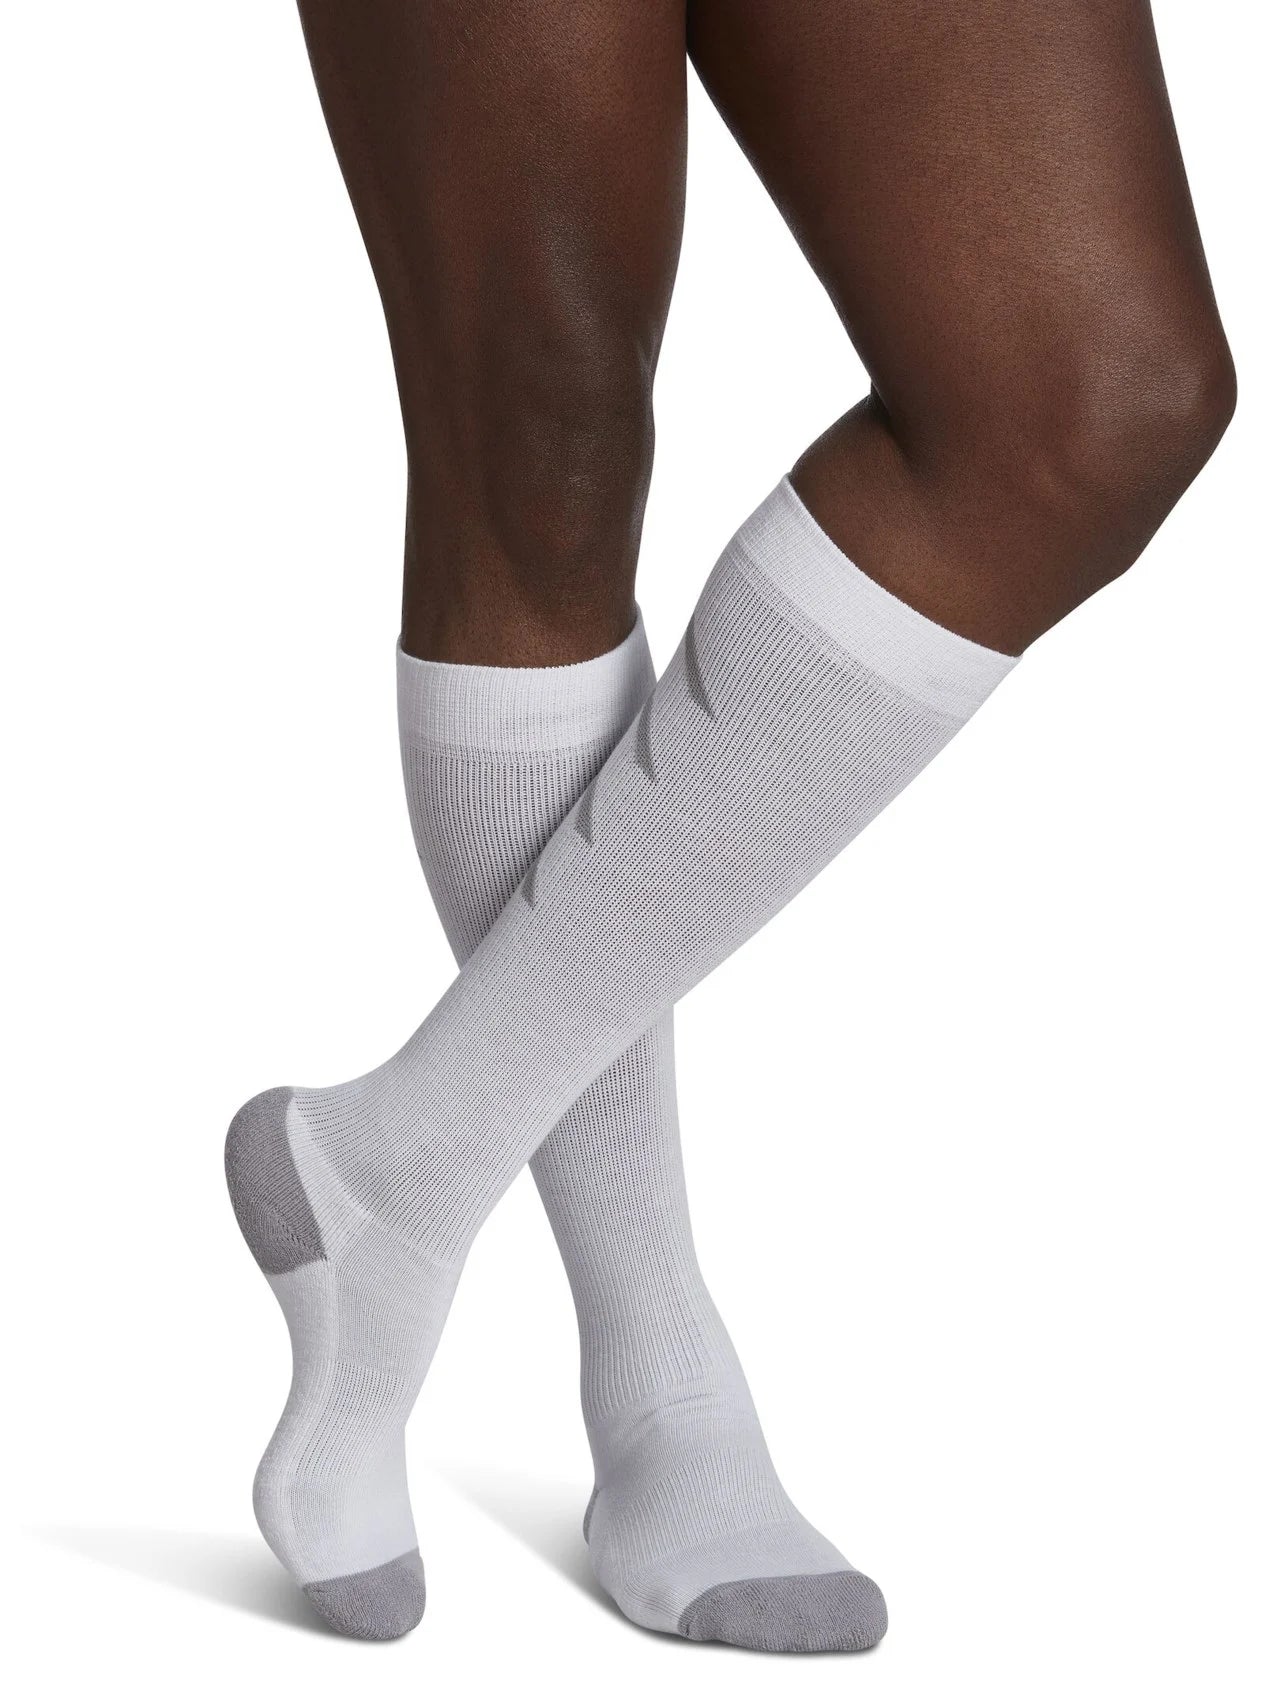 Athletic Recovery Socks